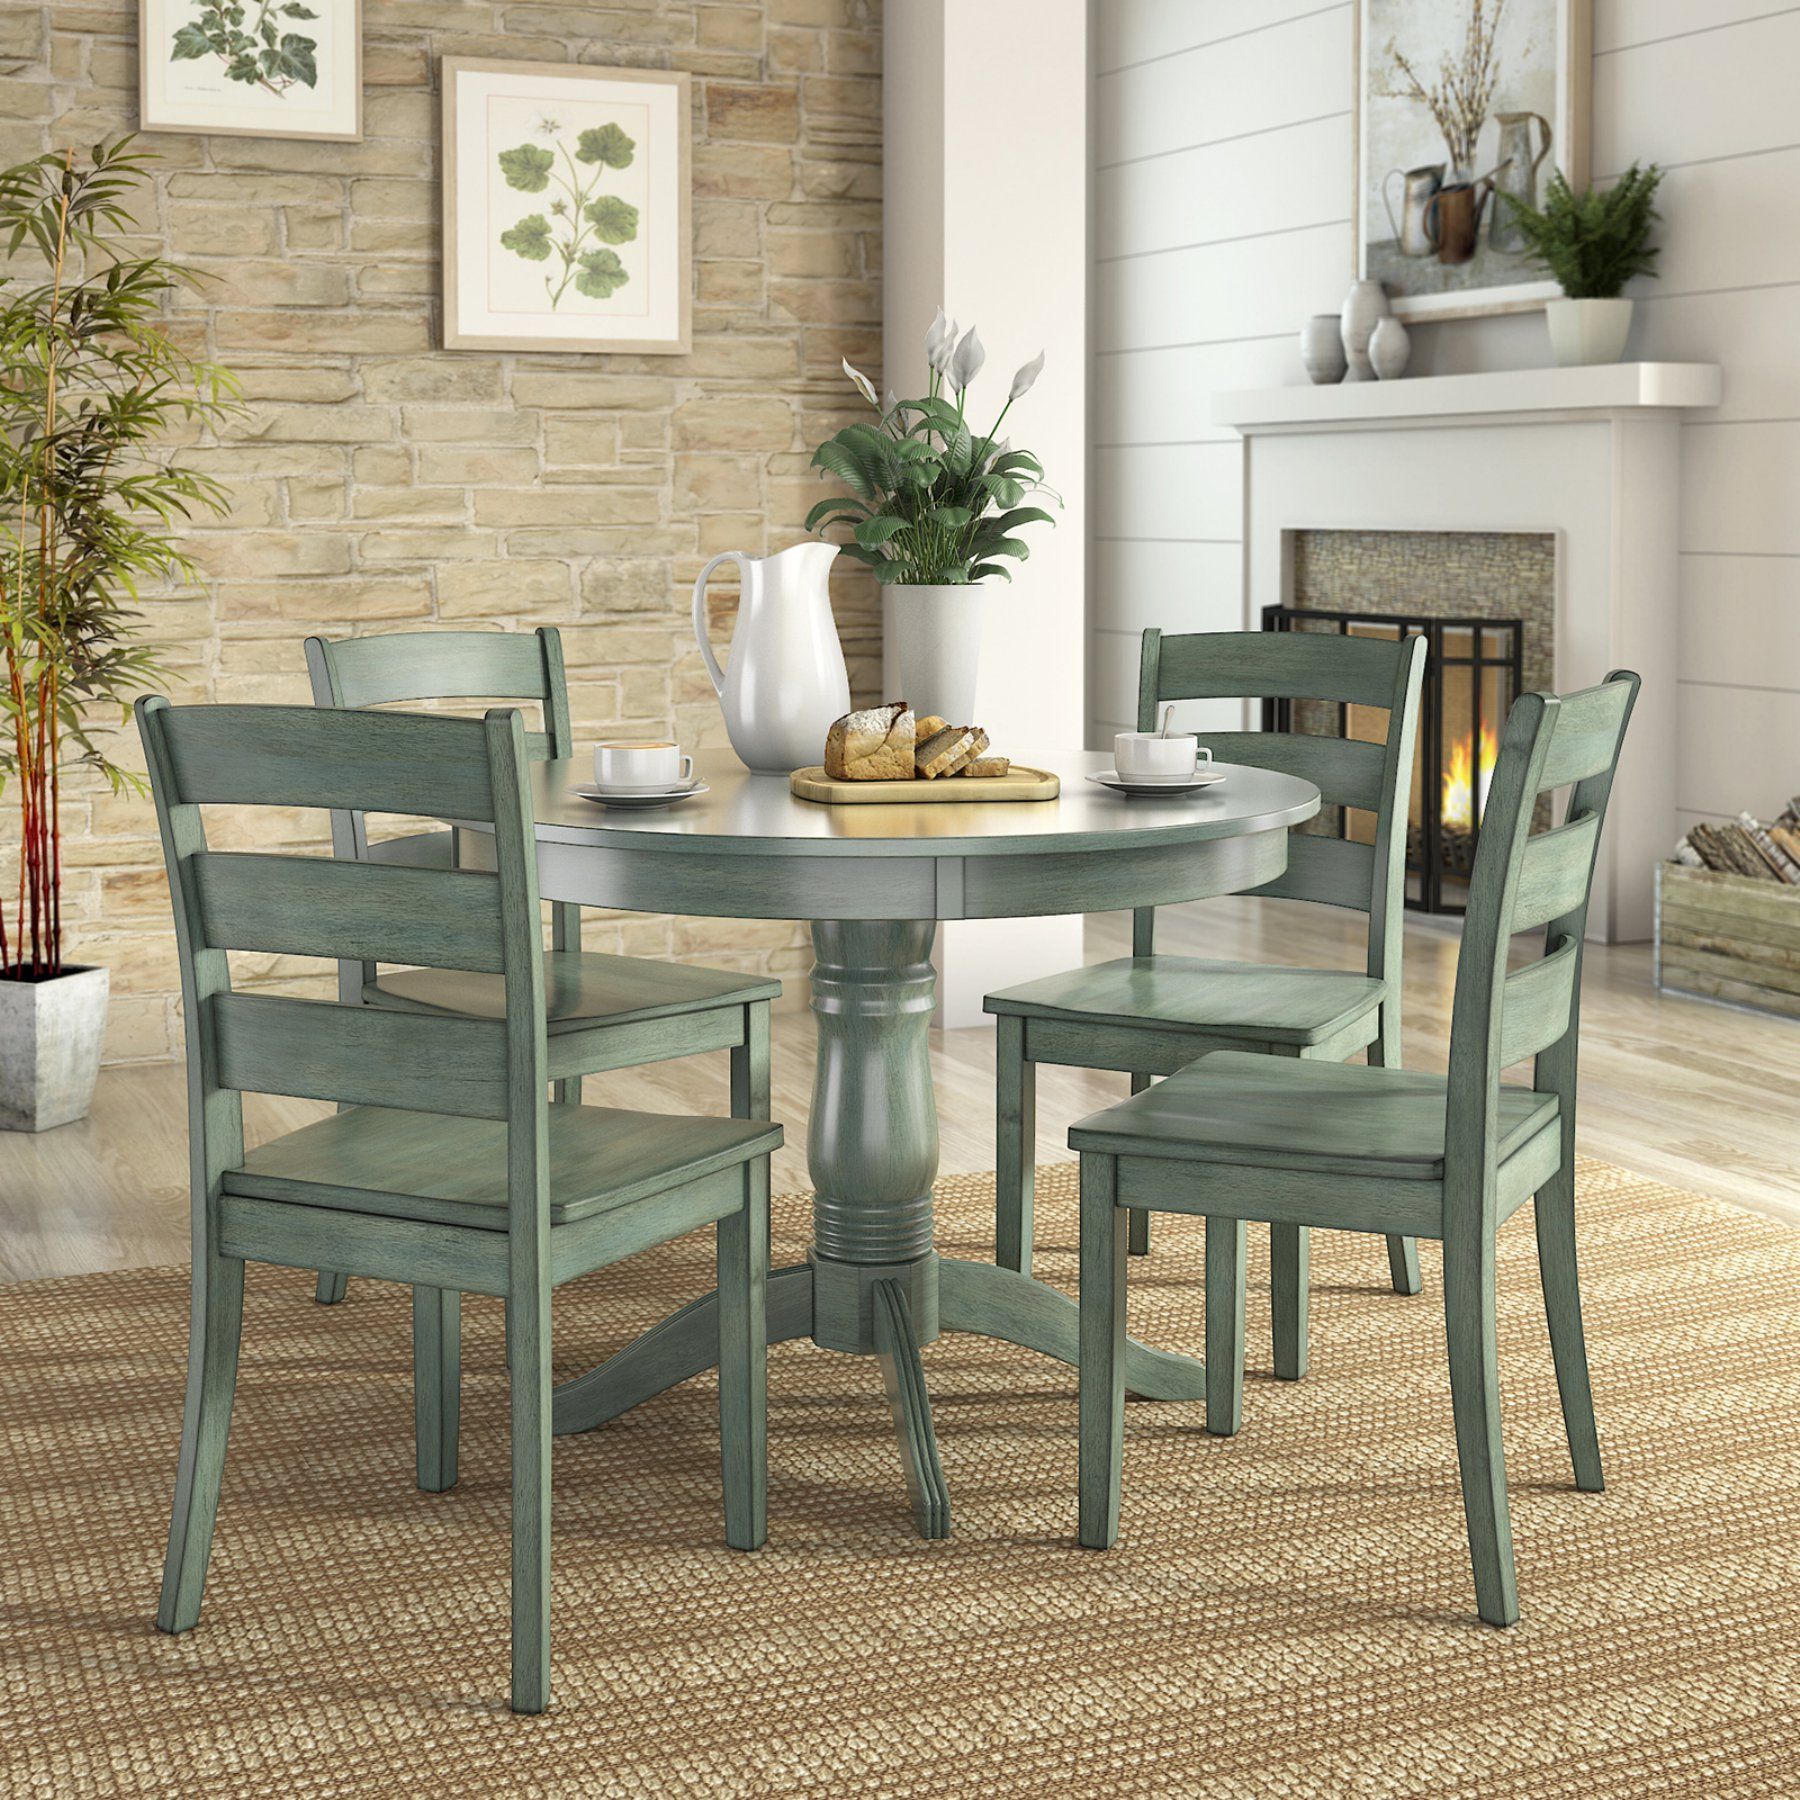 Weston Home Lexington 5 Piece Round Dining Table Set With Ladder Pertaining To Current Lamotte 5 Piece Dining Sets (View 5 of 20)